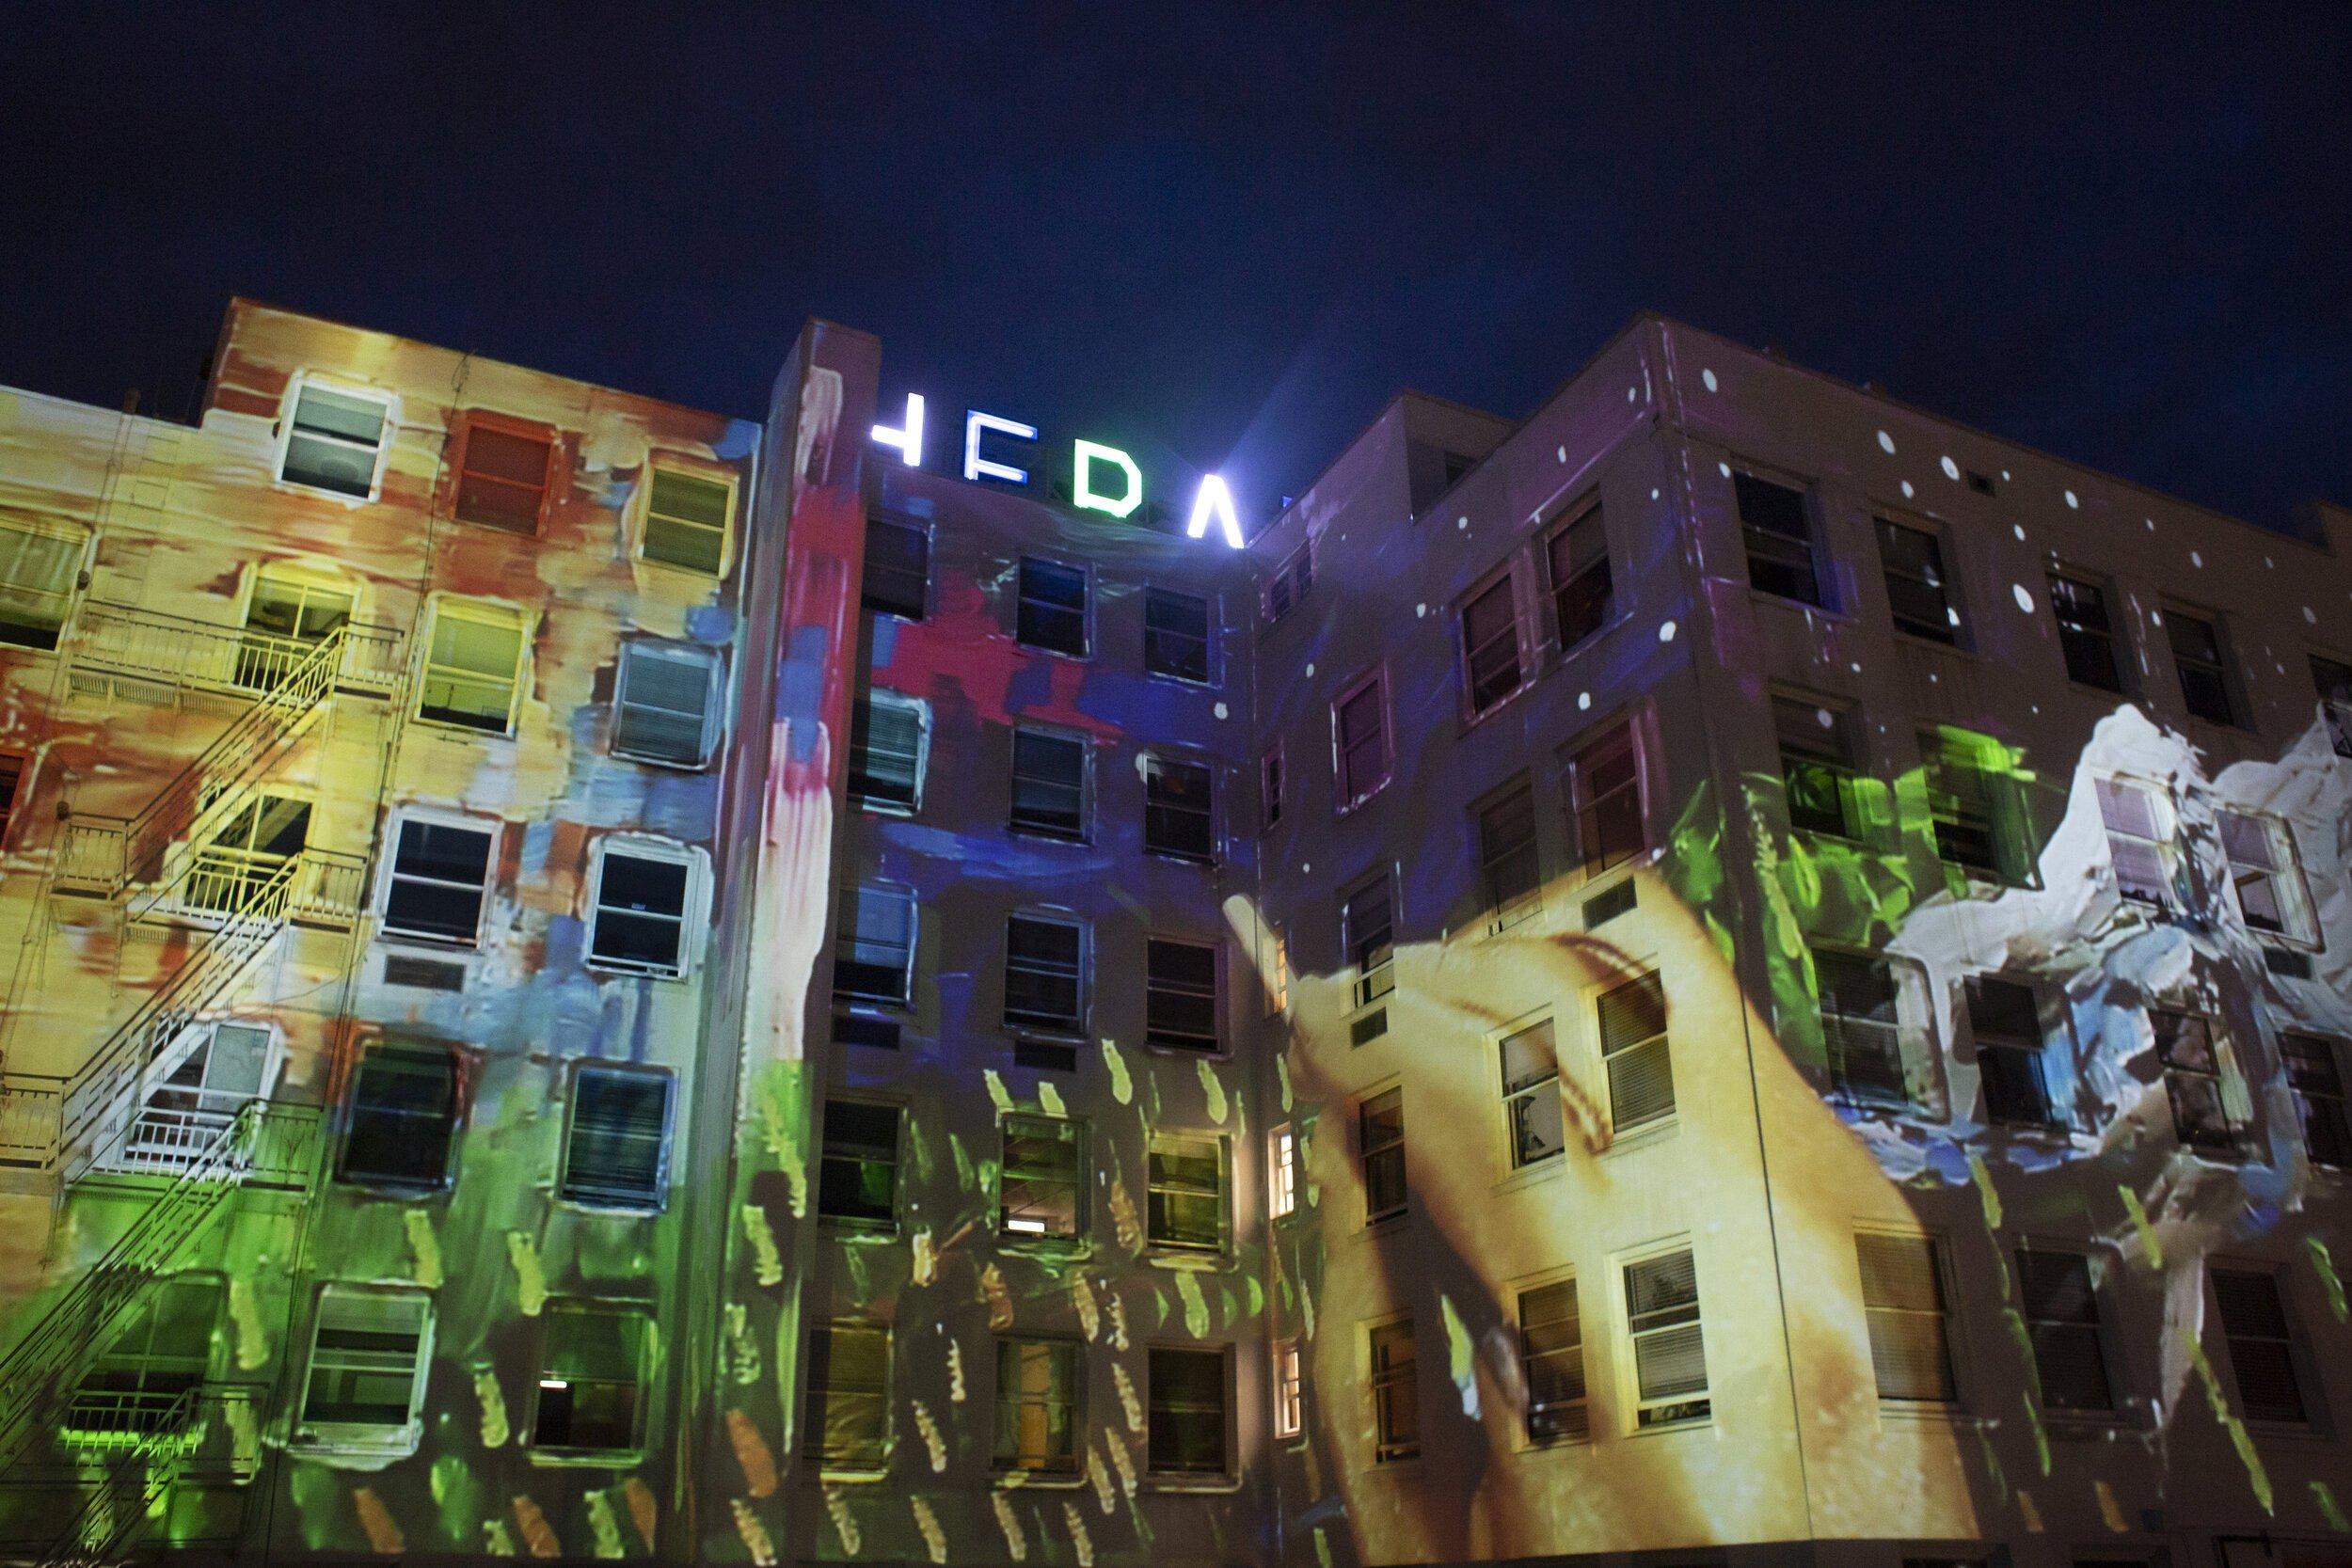 colorful paint strokes projected onto the entire front of the Herald building